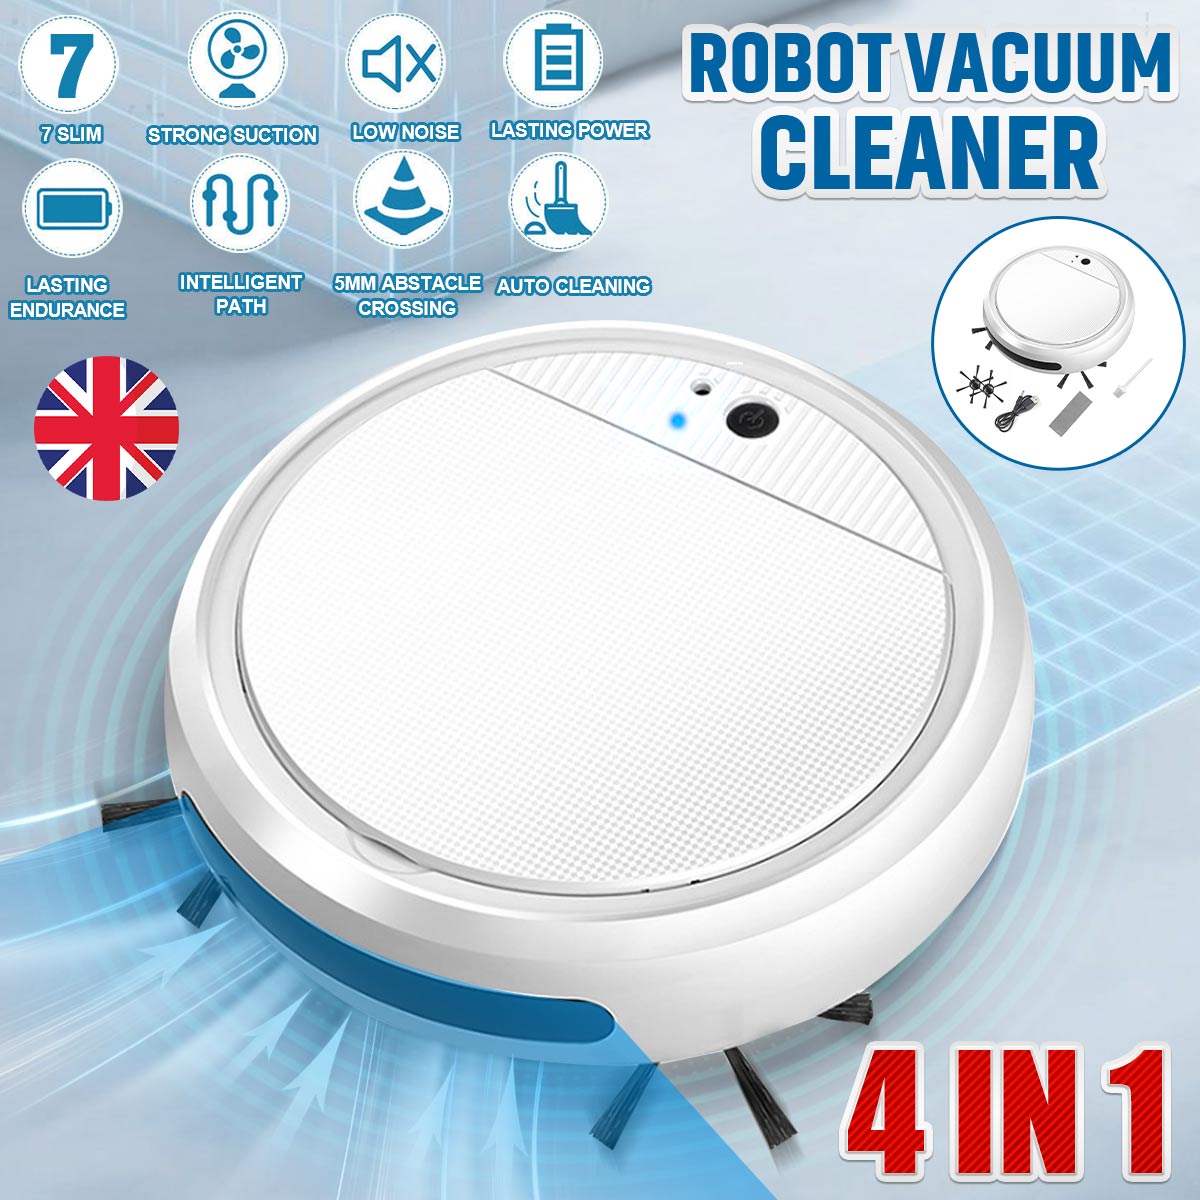 Smart Floor Robot Vacuum Cleaner 1800Pa Strong Suction Sweeper USB Rechargeable Dry Wet Sweeping Mopping Sterilizer Home Cleaner